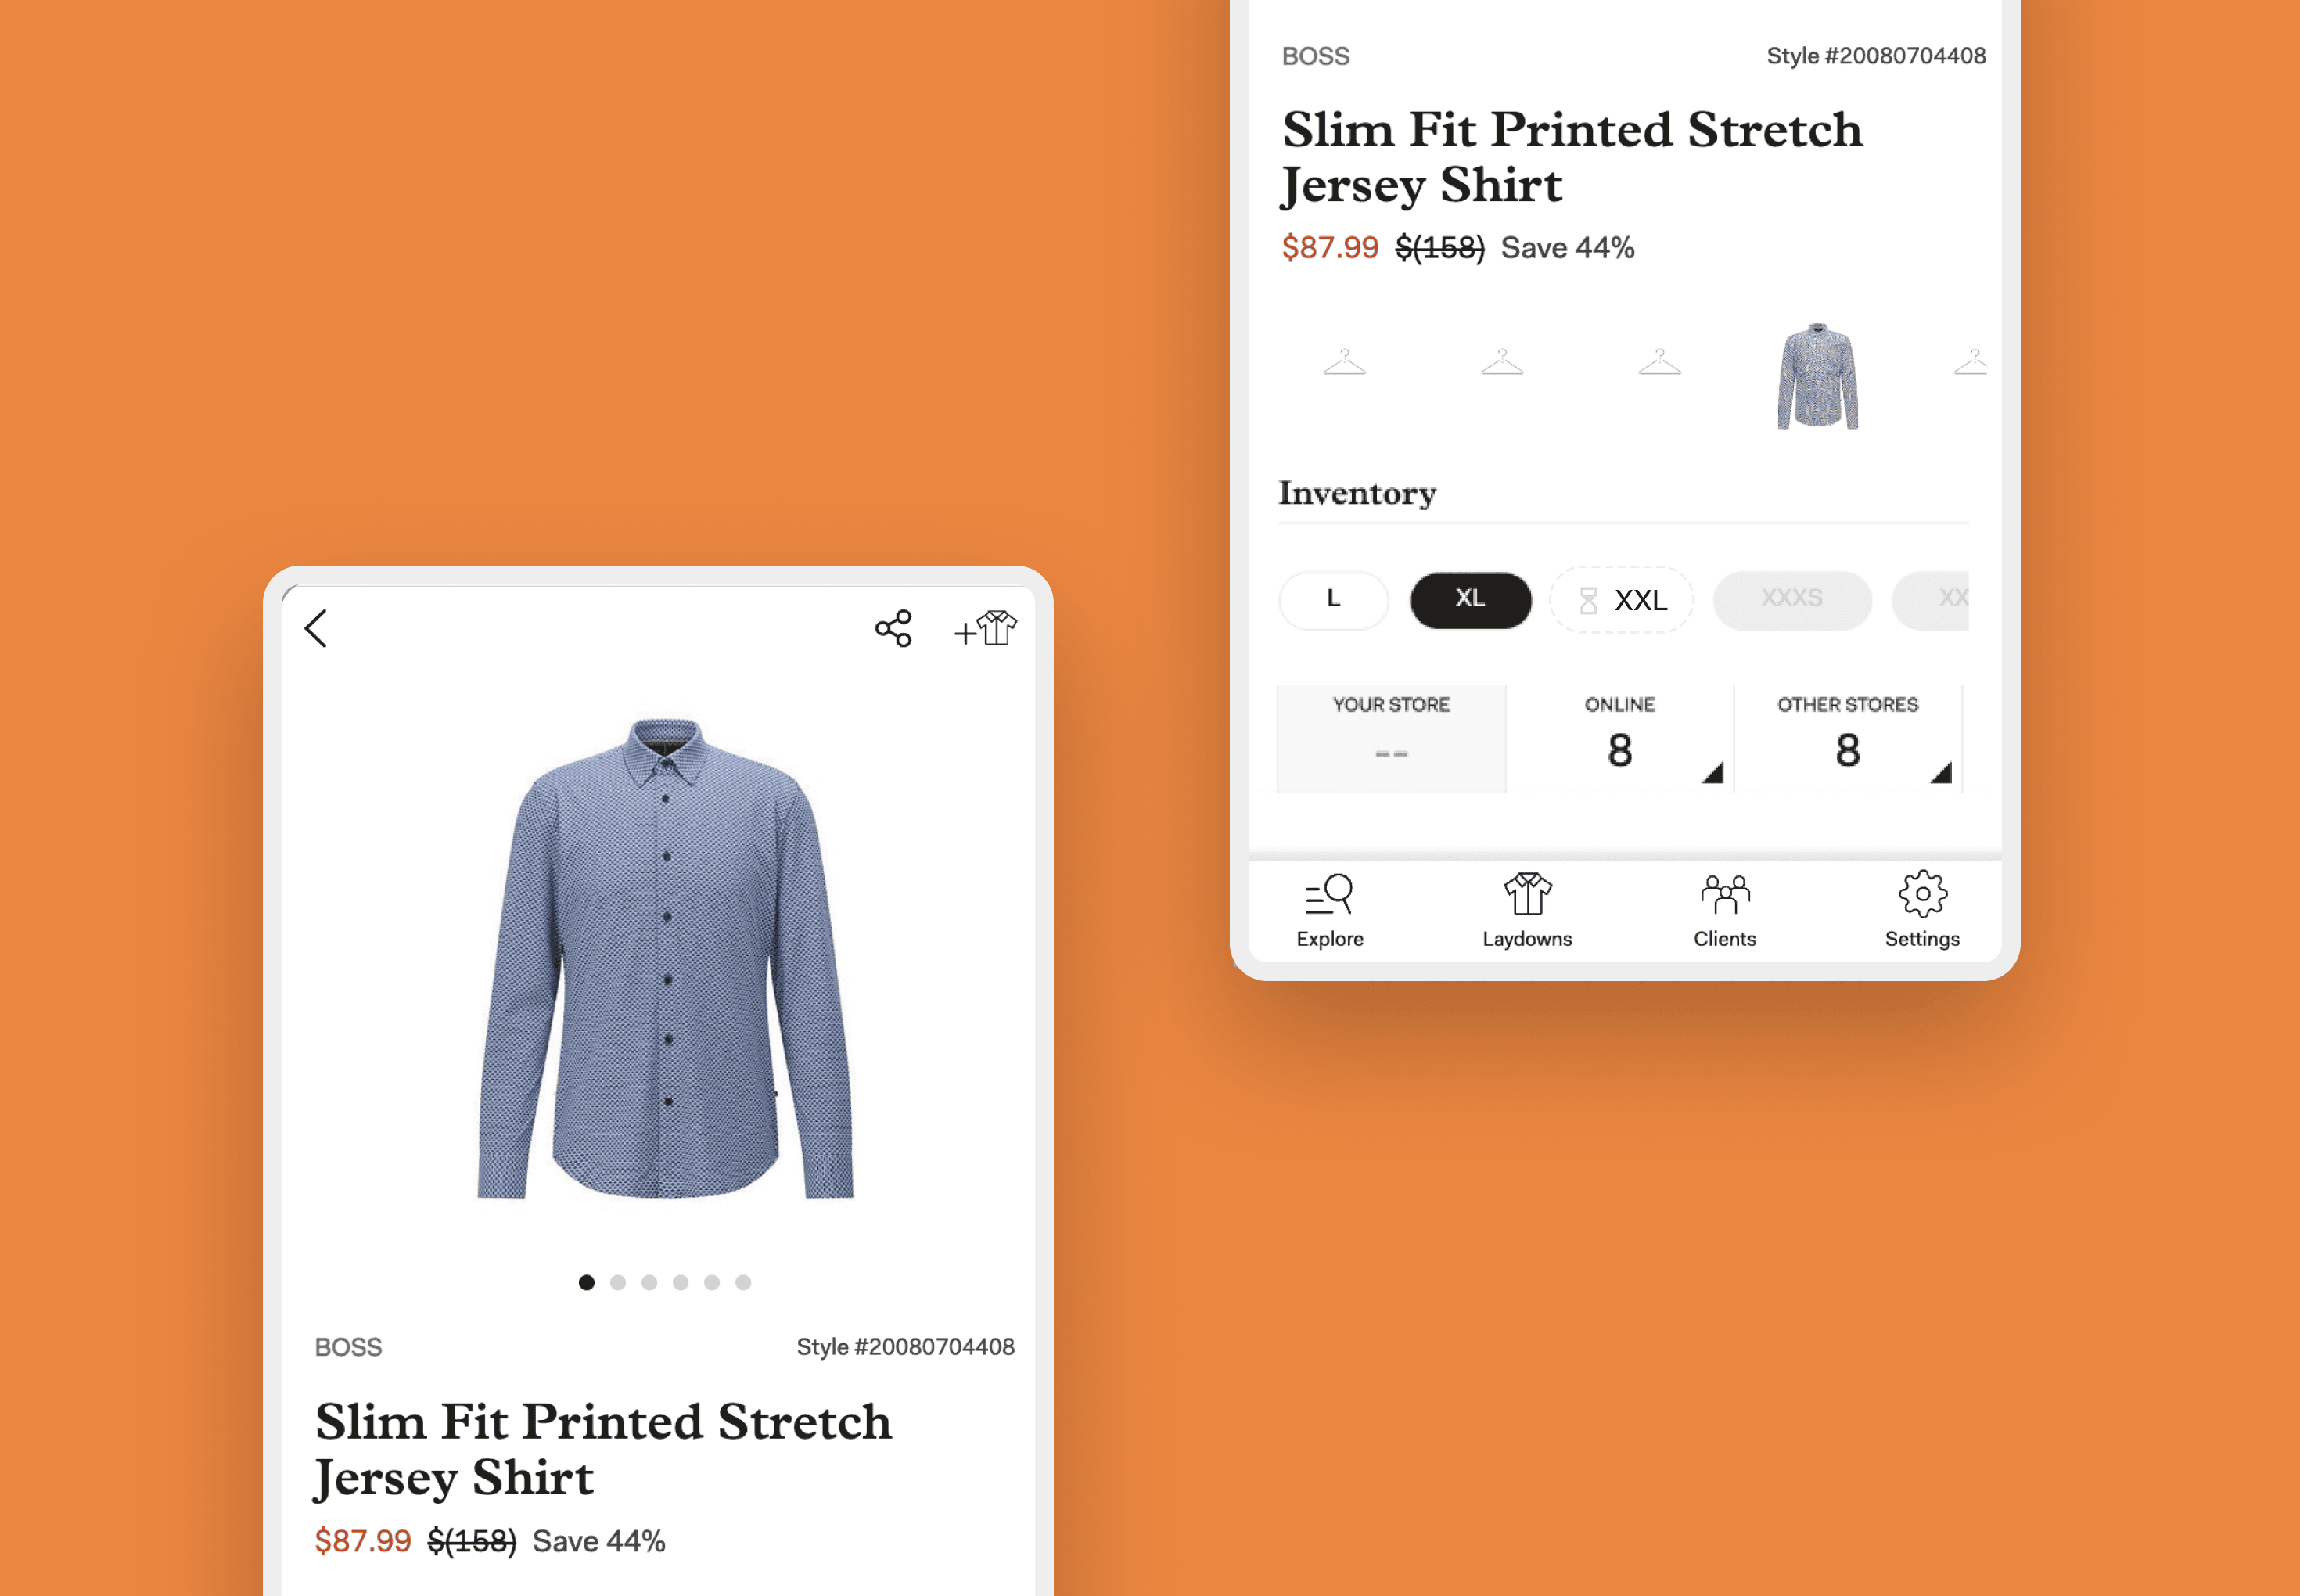 Product display of t-shirt on an app.